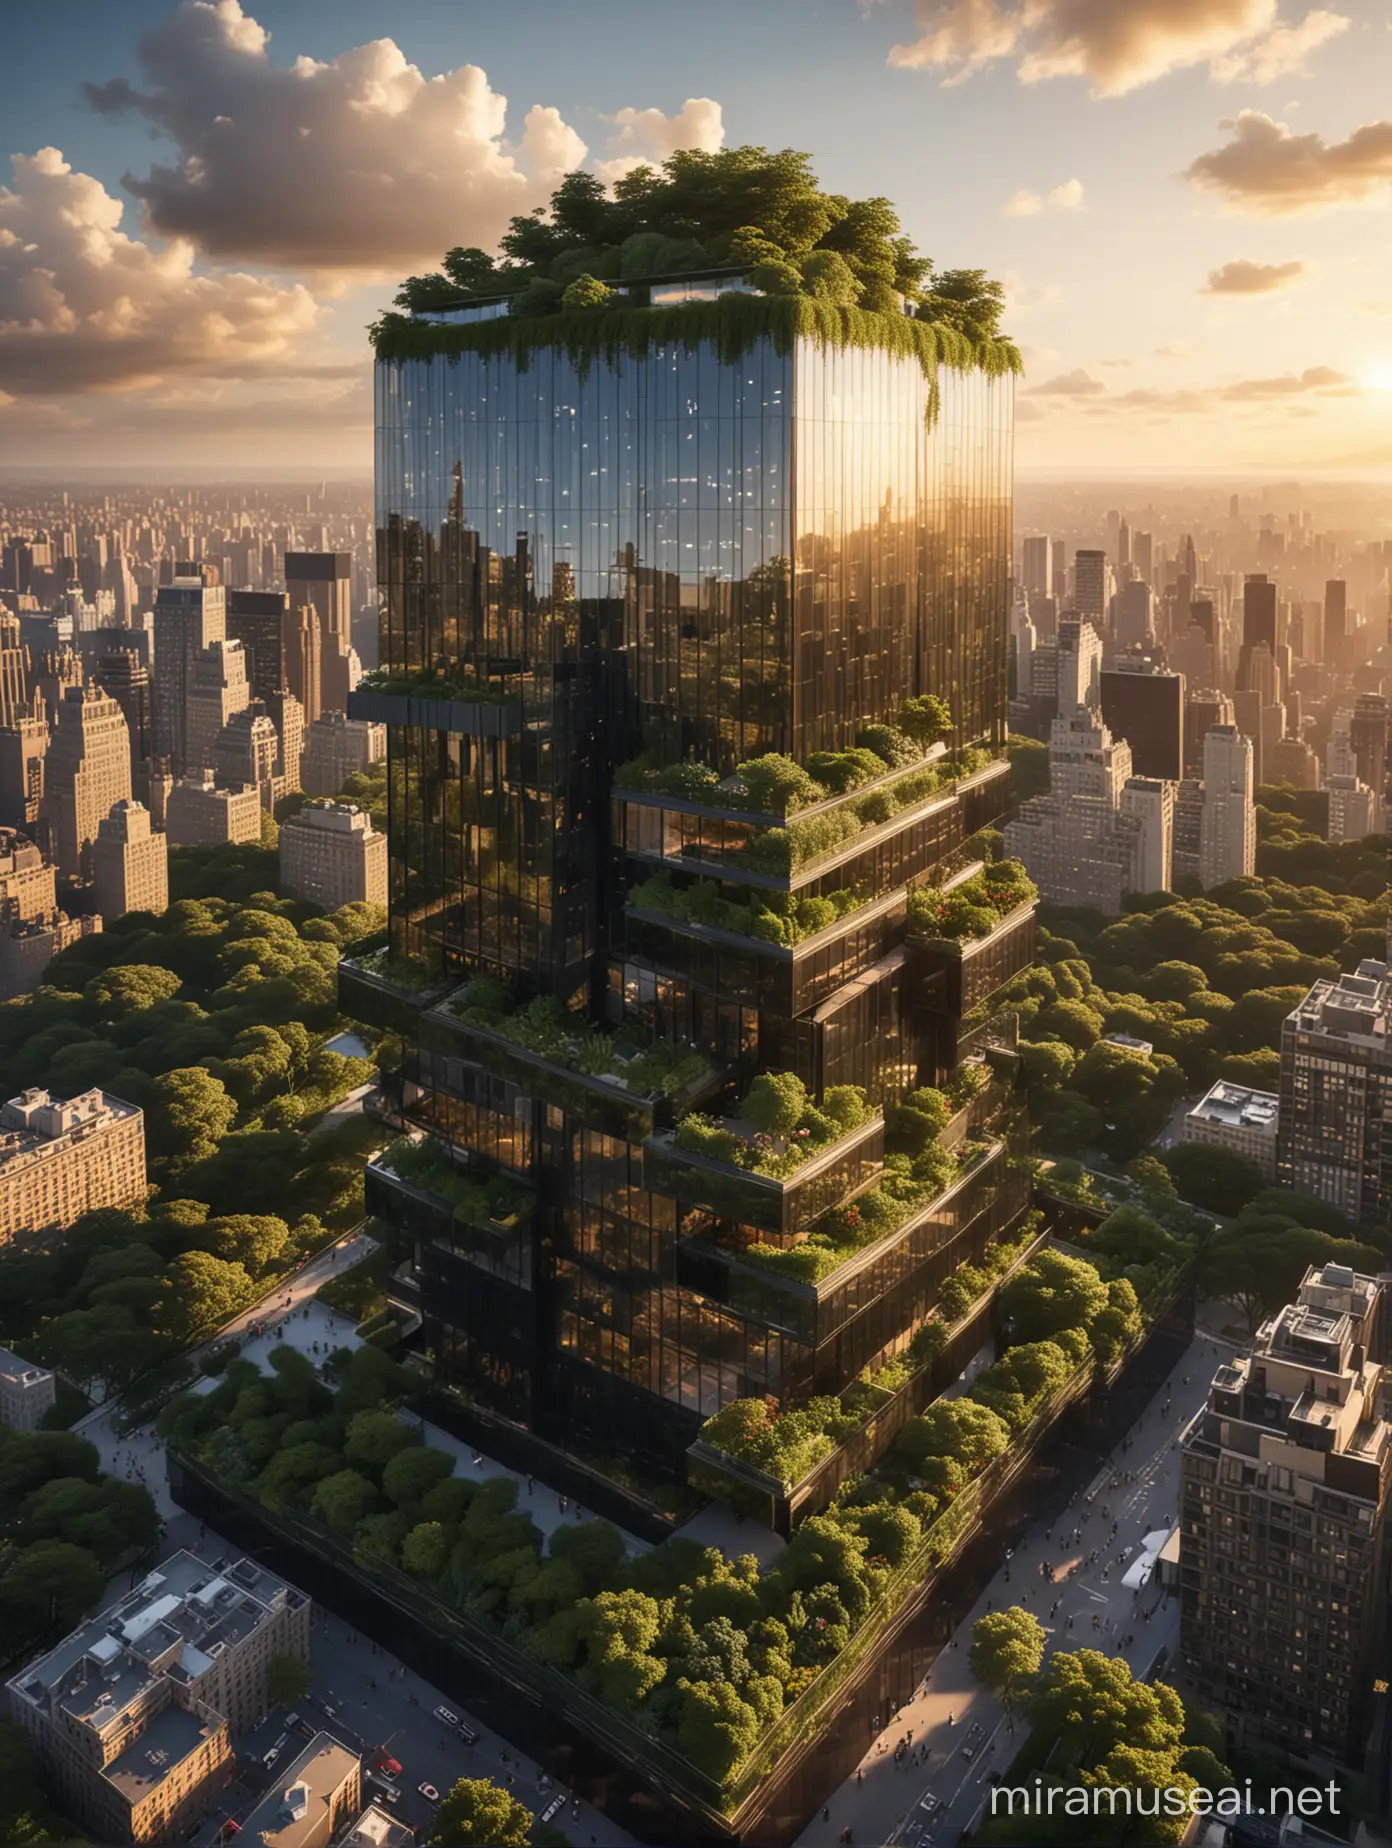 Eco-friendly,  tower, terraced building with lush rooftop gardens and fluid lines, , sublime and visionary, at the central park, many cubic black glass, designed by  modern,  32k , drone view, with clouds hyper- realistic photo, cinematic light, sunset with people, with lush